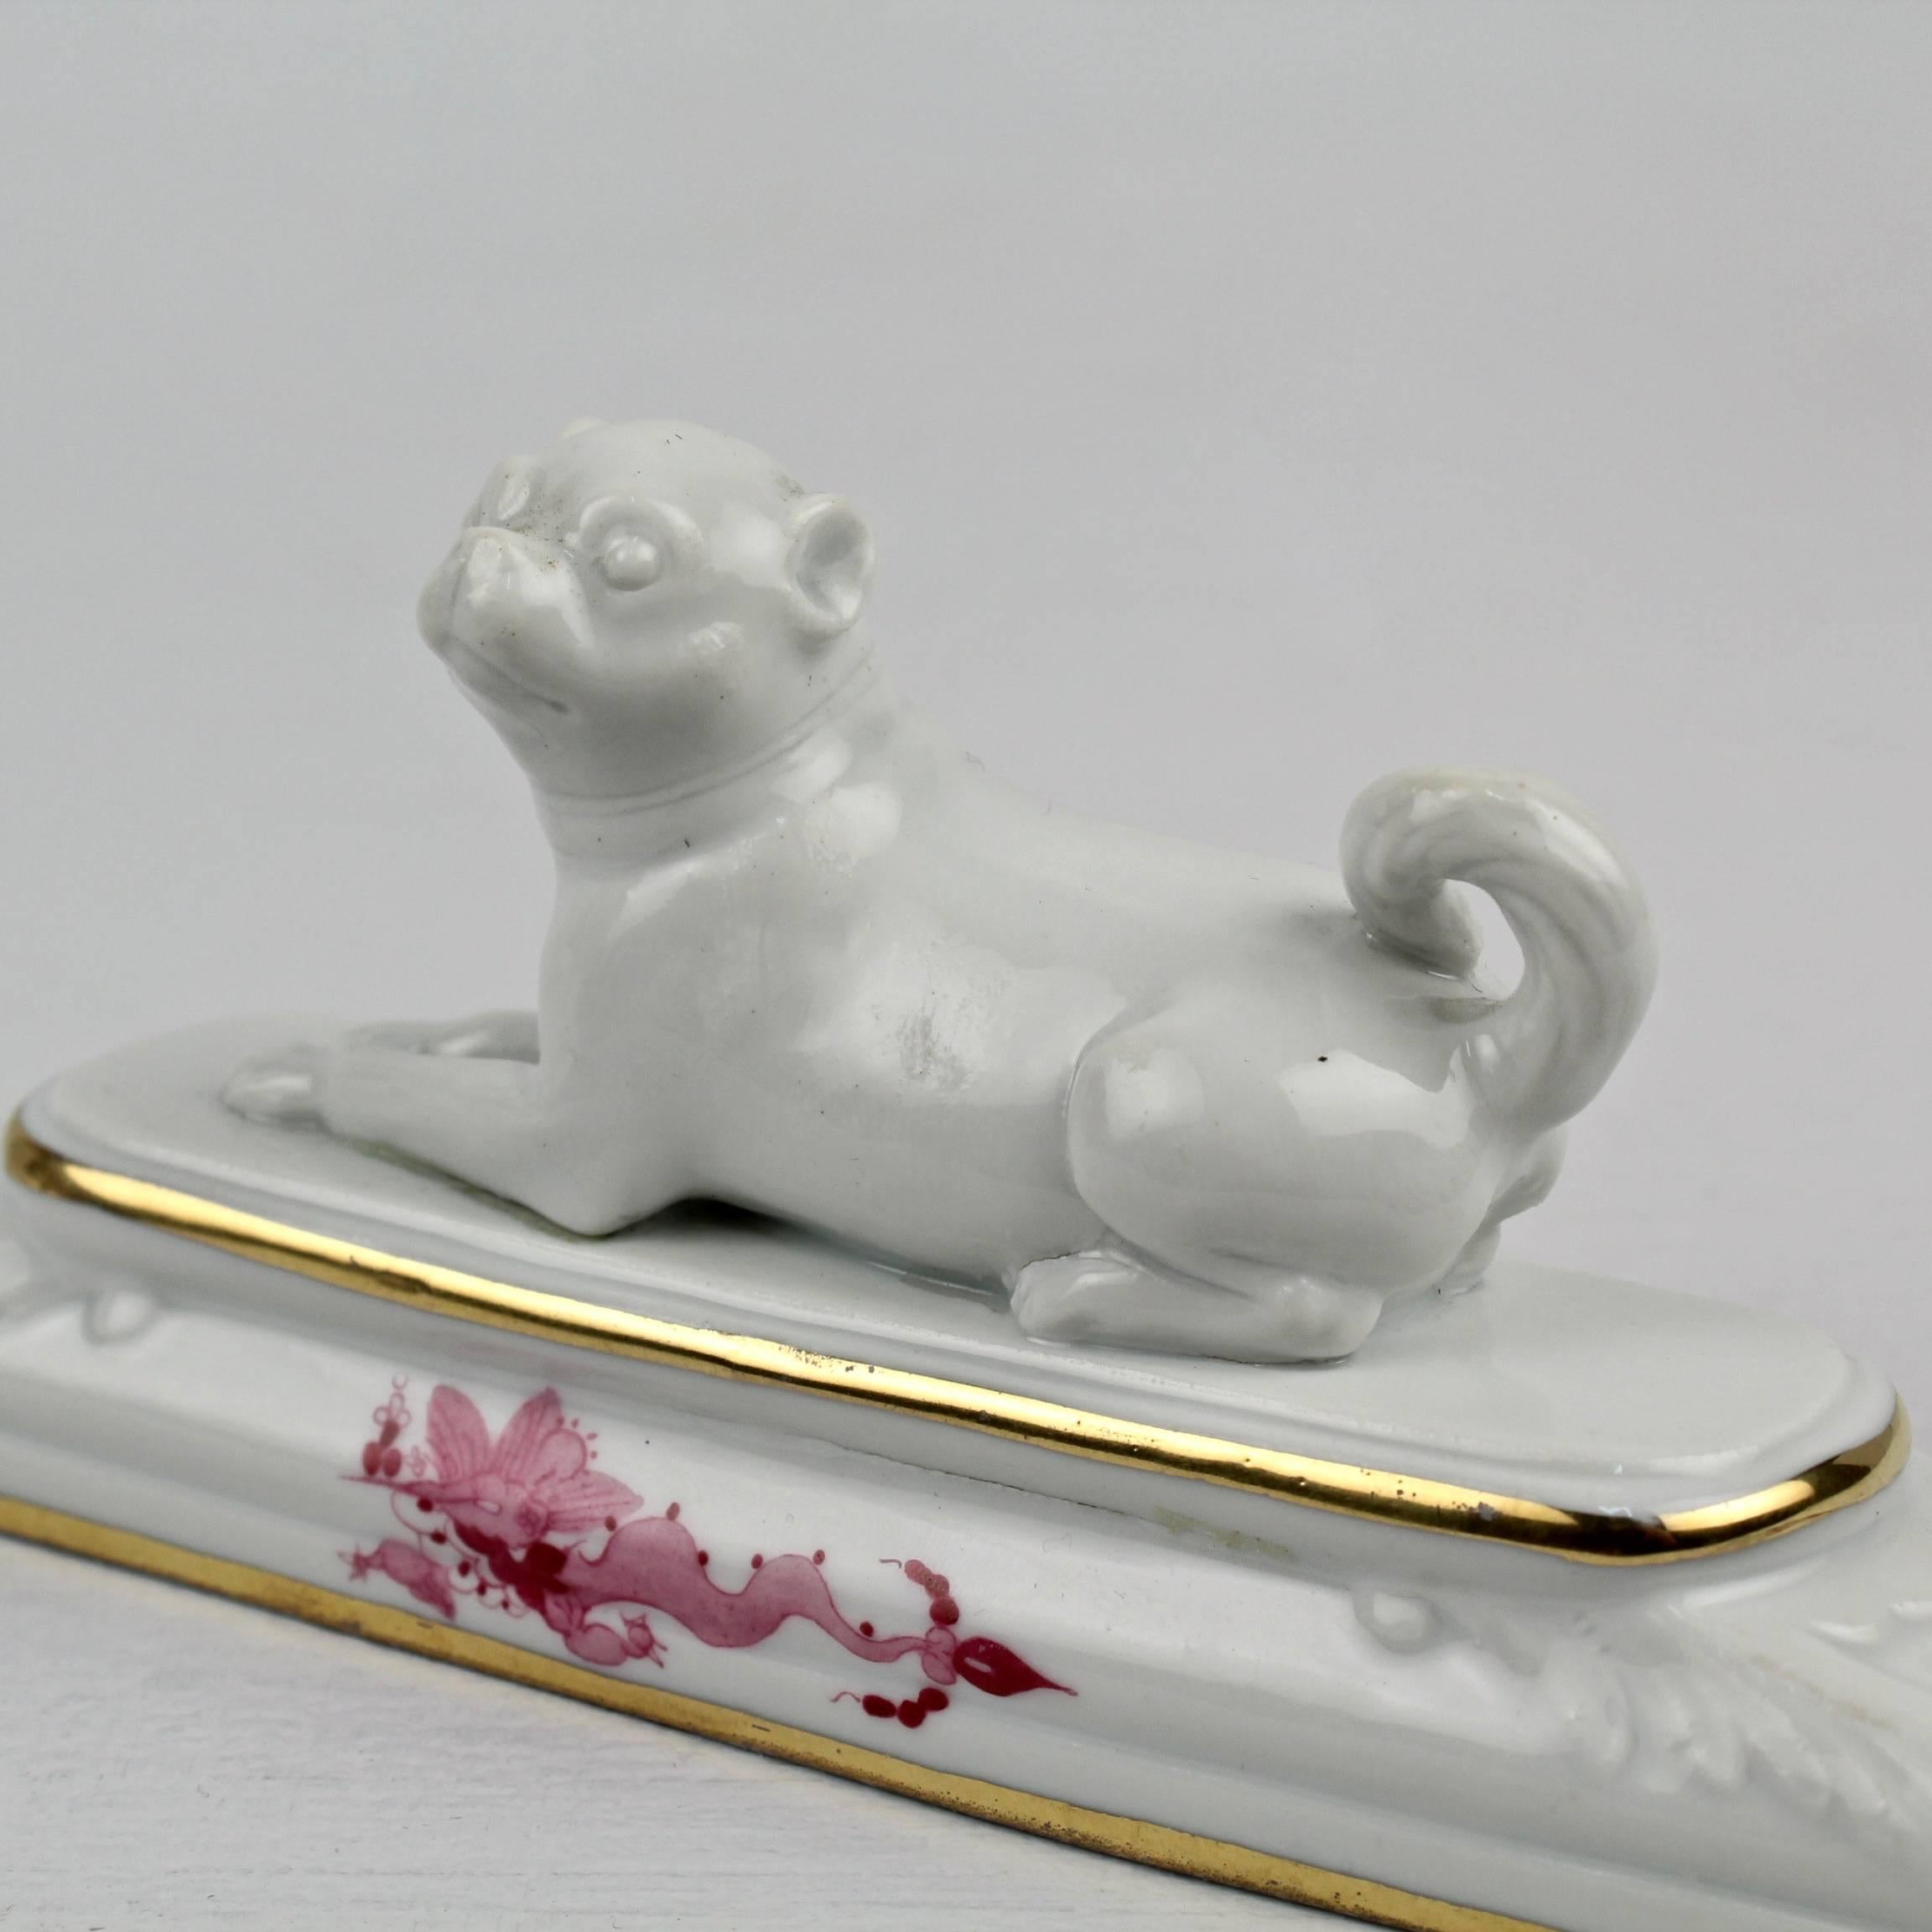 Rococo Meissen Porcelain Figural Pug Paperweight in the Pink Court Dragon Pattern